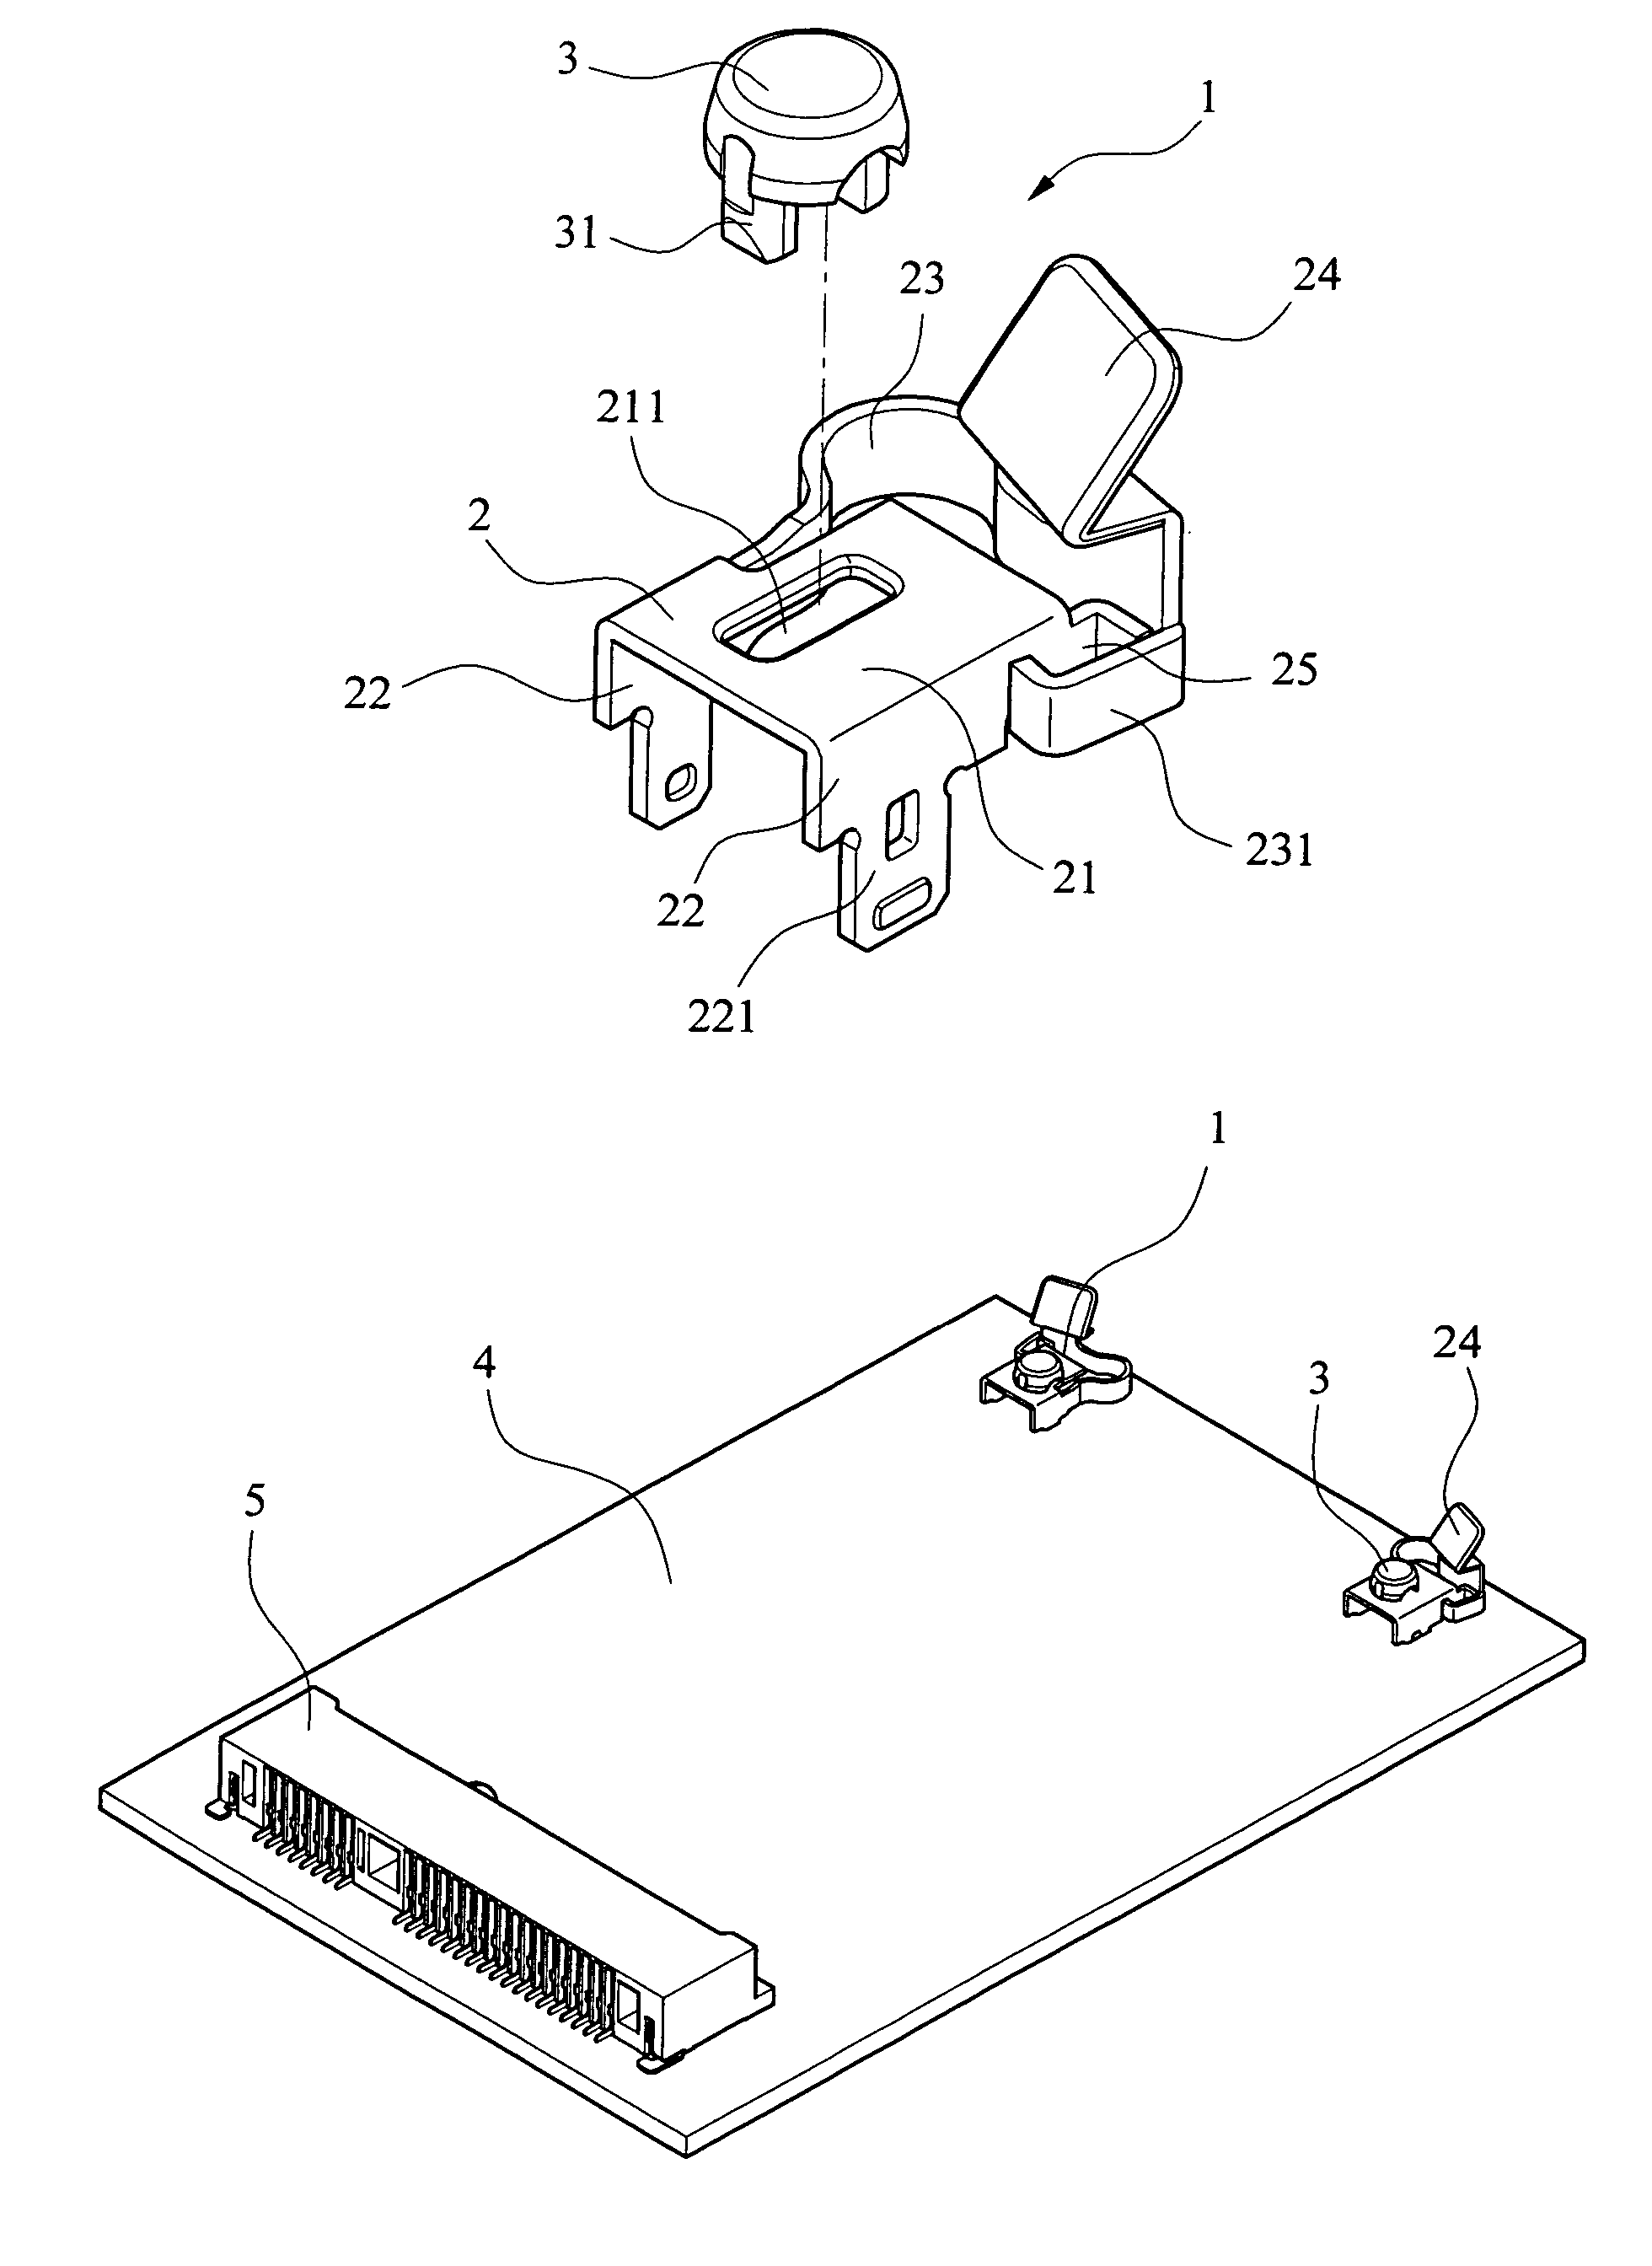 Board standoff device for electrical connector assembly